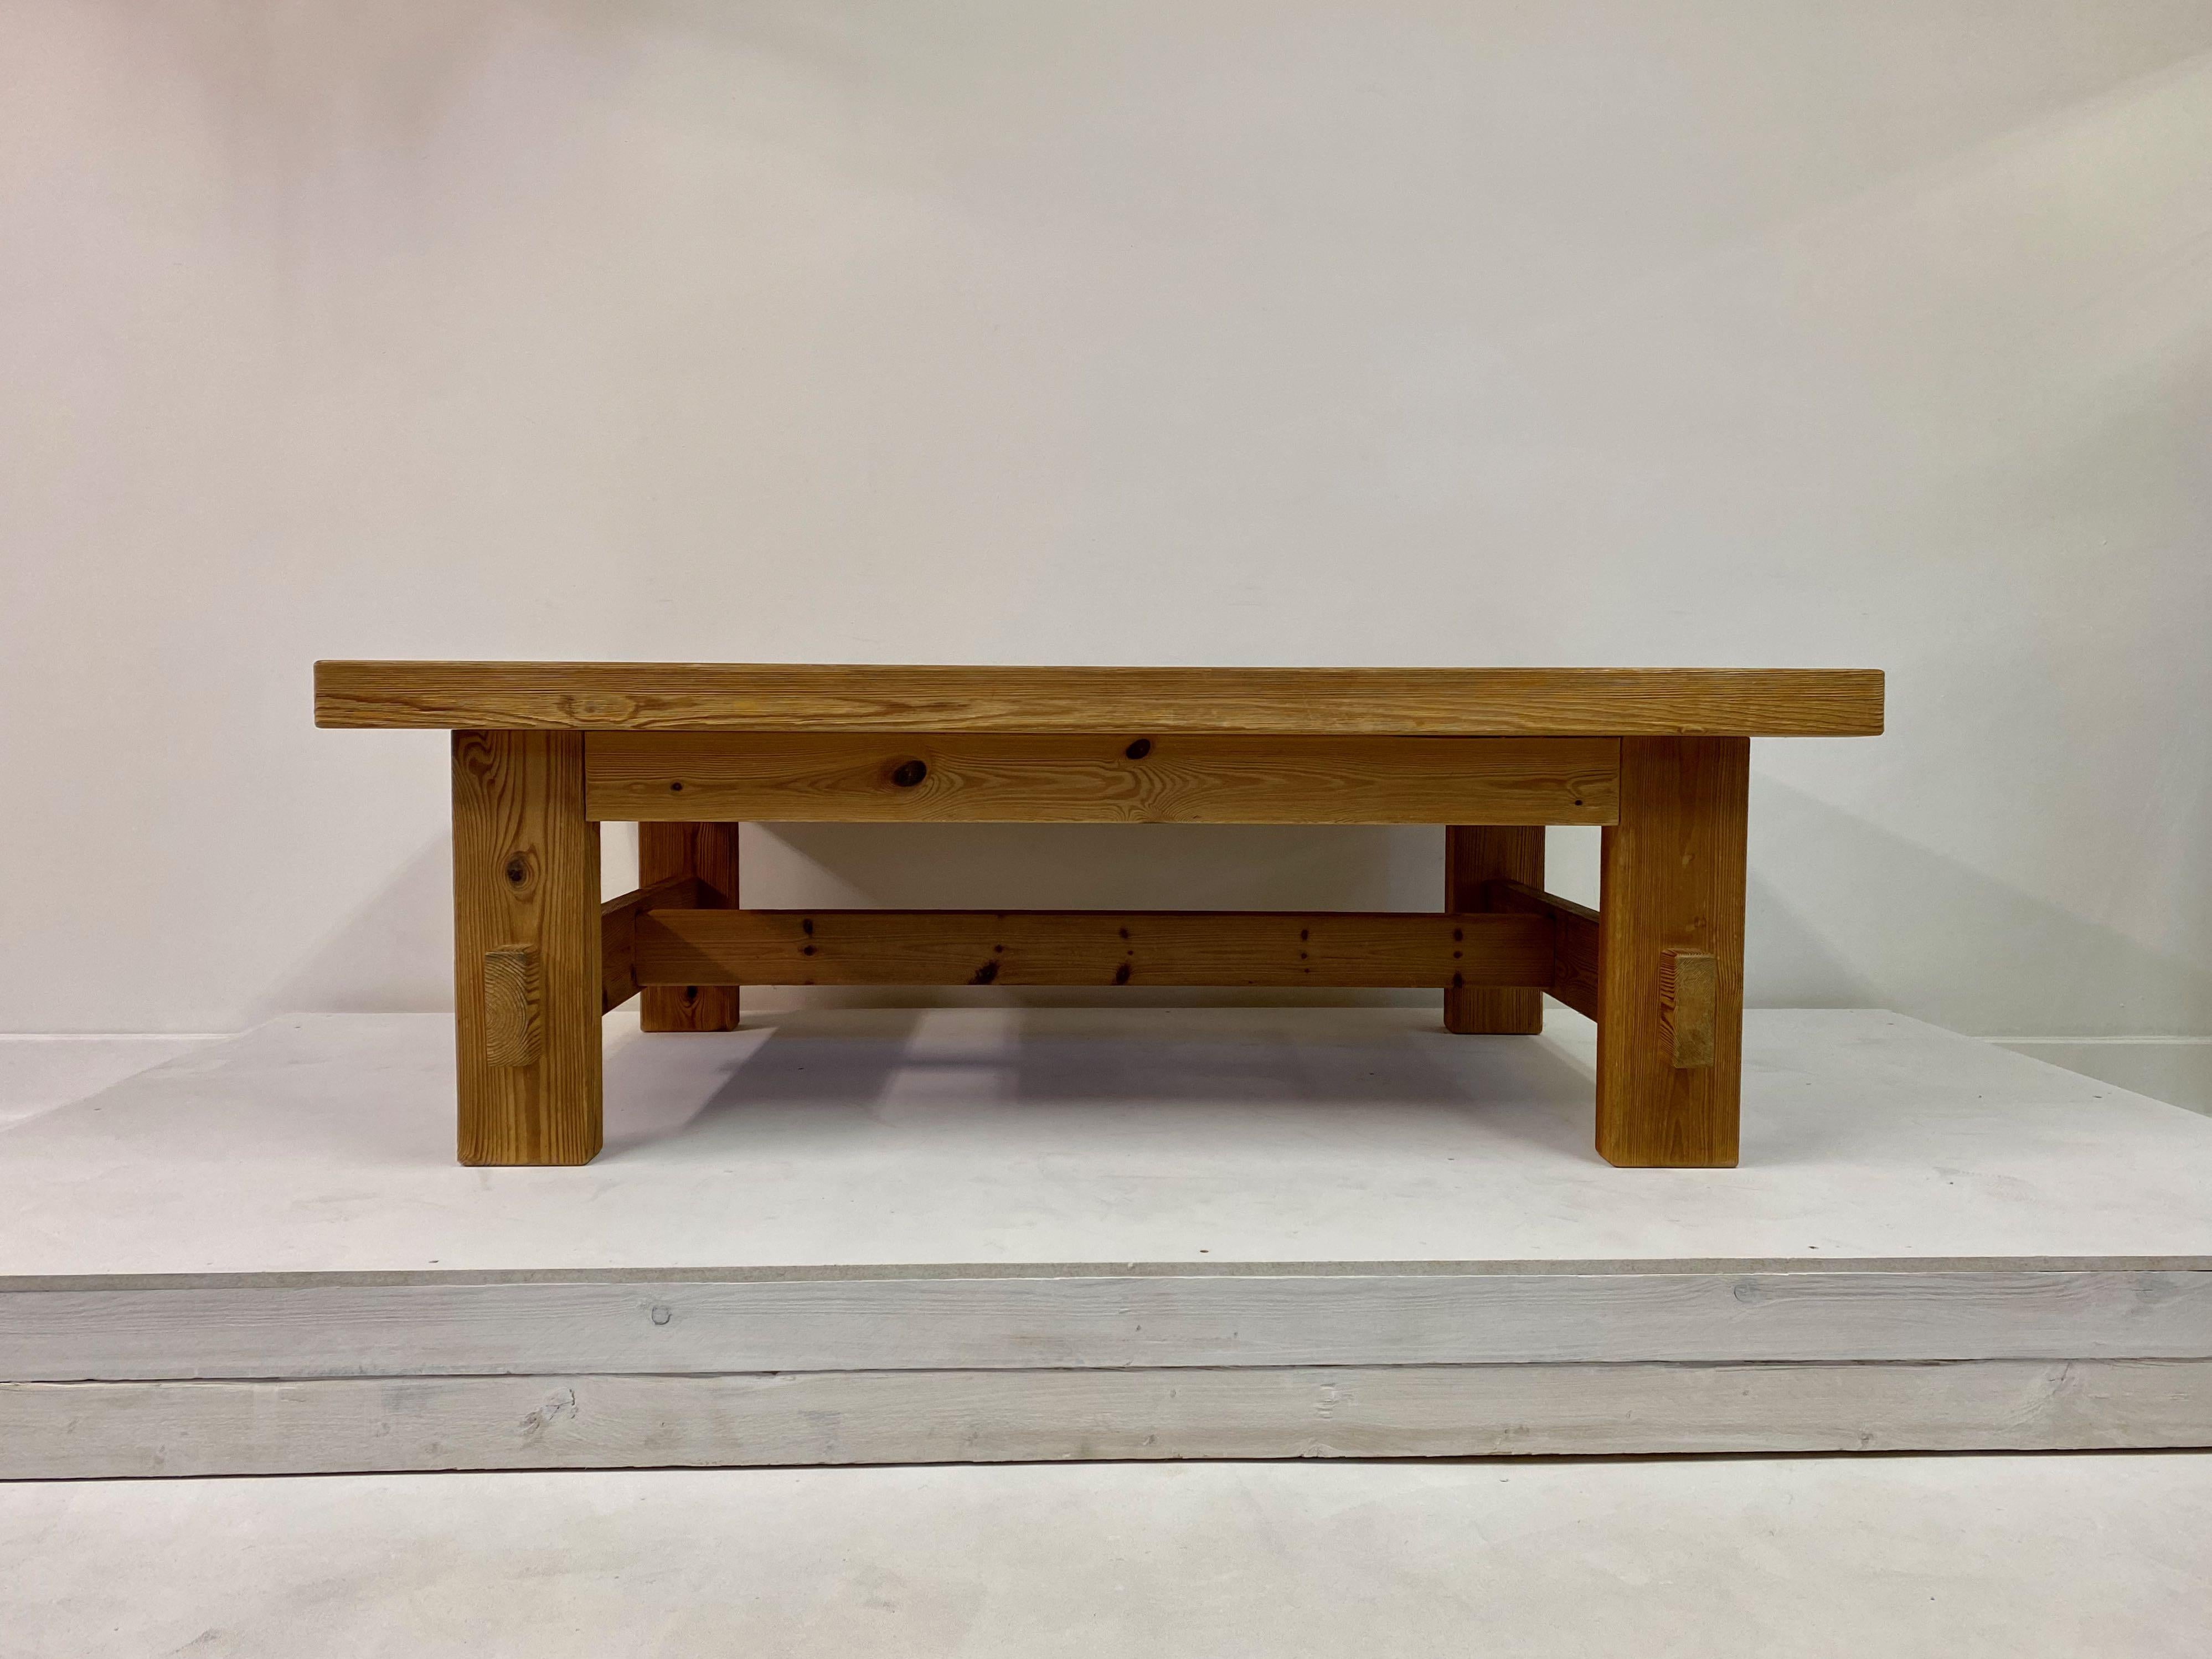 Pomeranian pinewood coffee table

By Jens Lyngsoe

Retailed by Anton Dam

Made from timber from demolished buildings in Copenhagen

Wood could be as old as 18th century

Denmark.